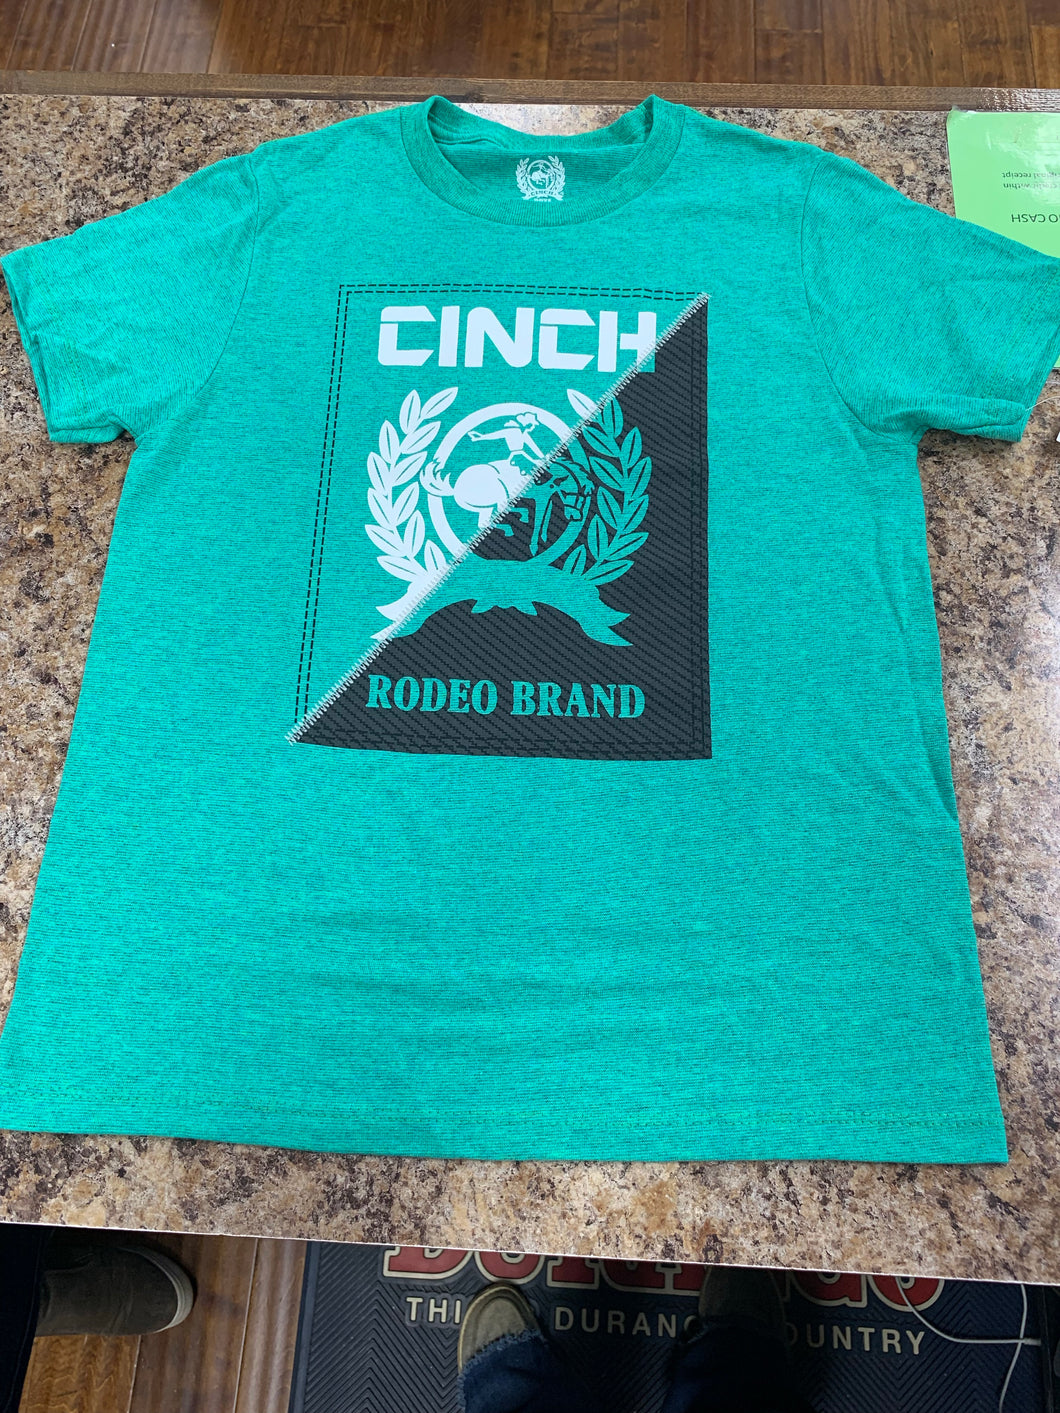 Cinch Boy’s Rodeo Brand Turquoise